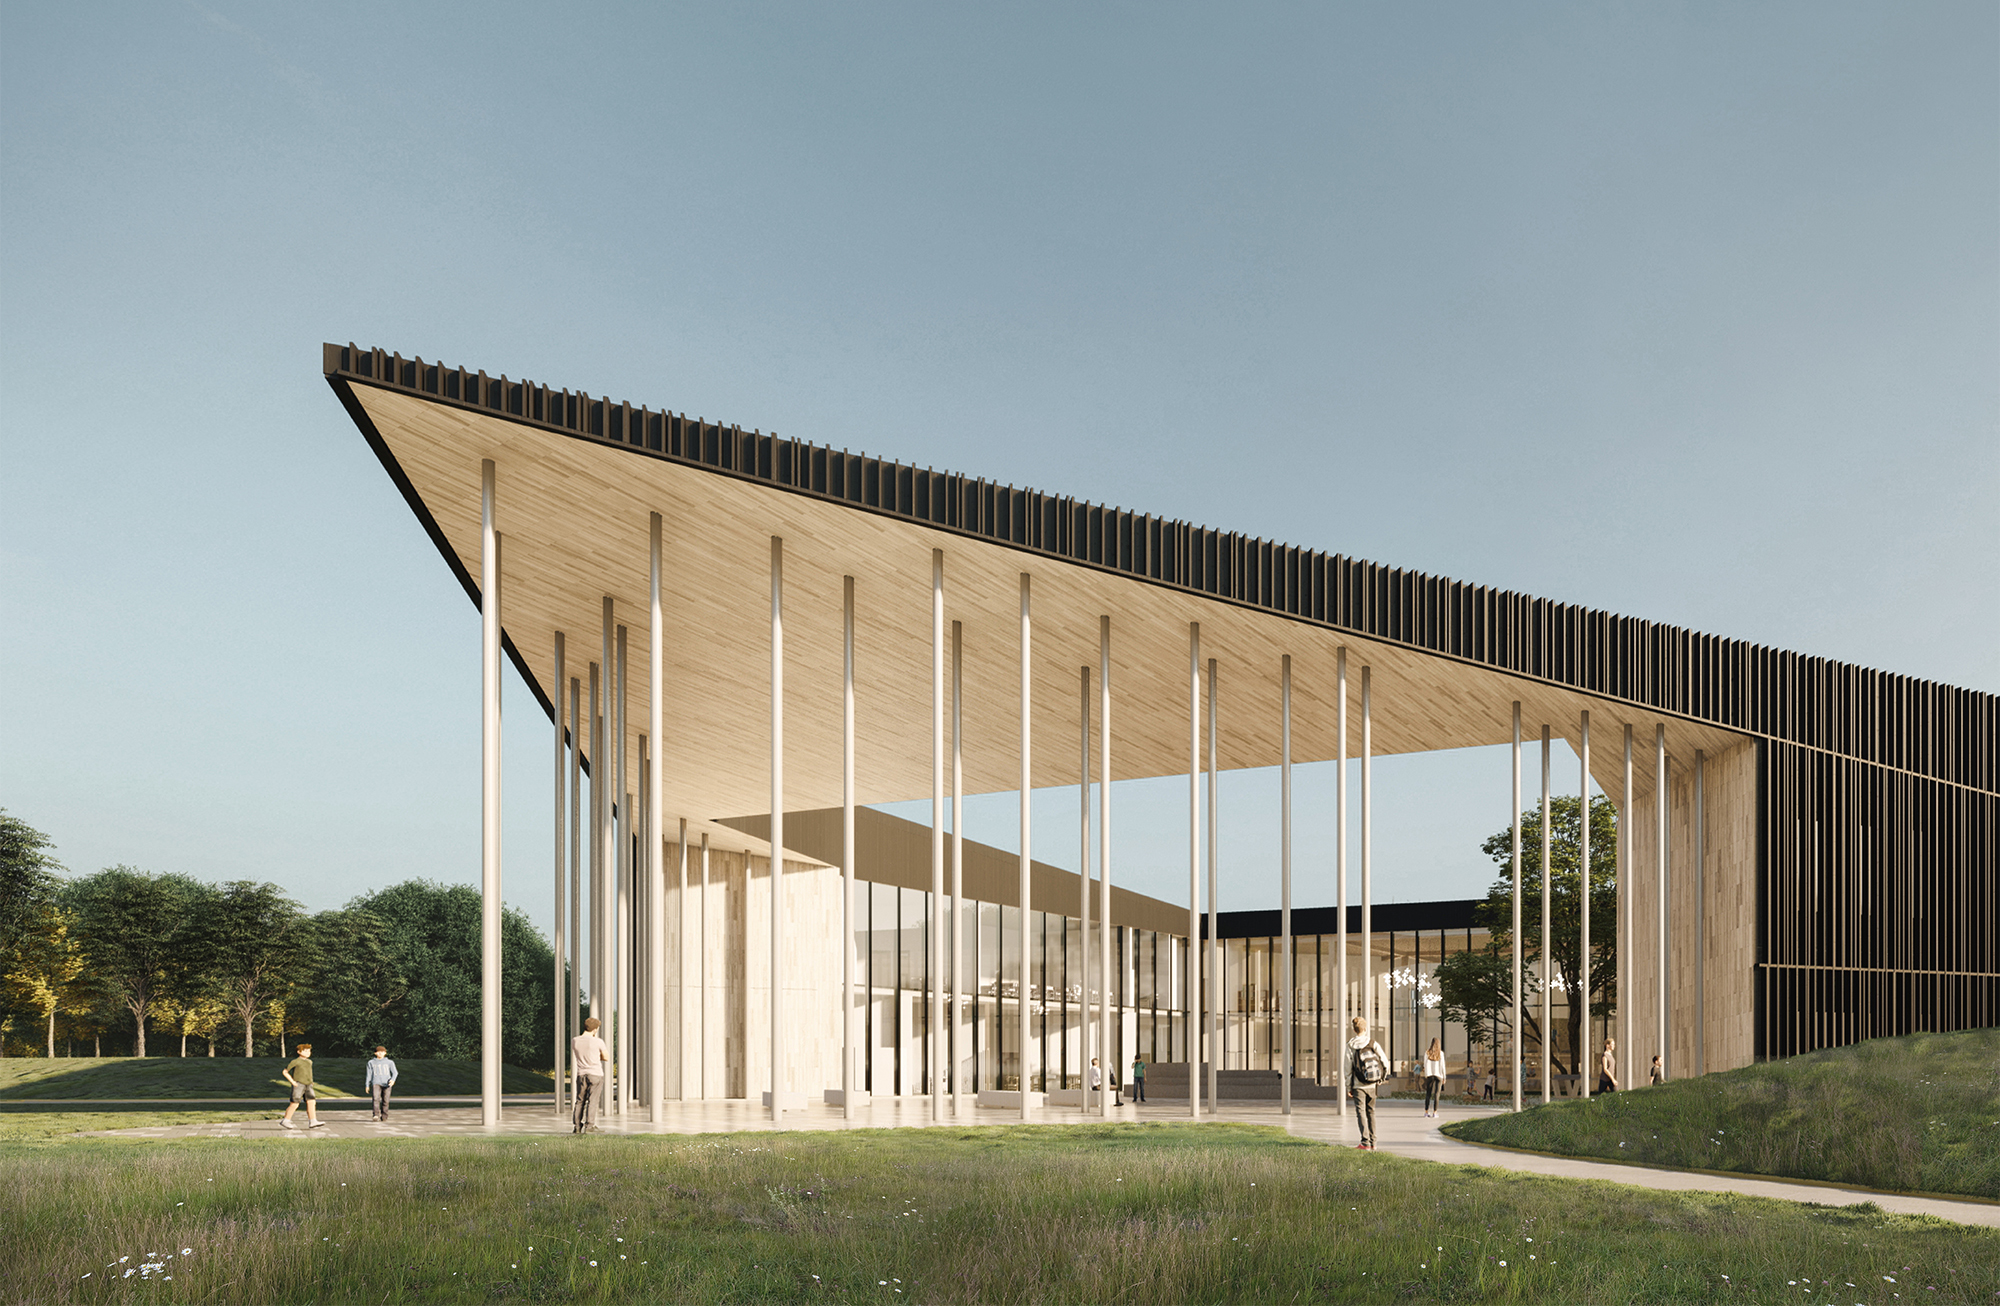 Architectural competition of Rae state gymnasium and sports building